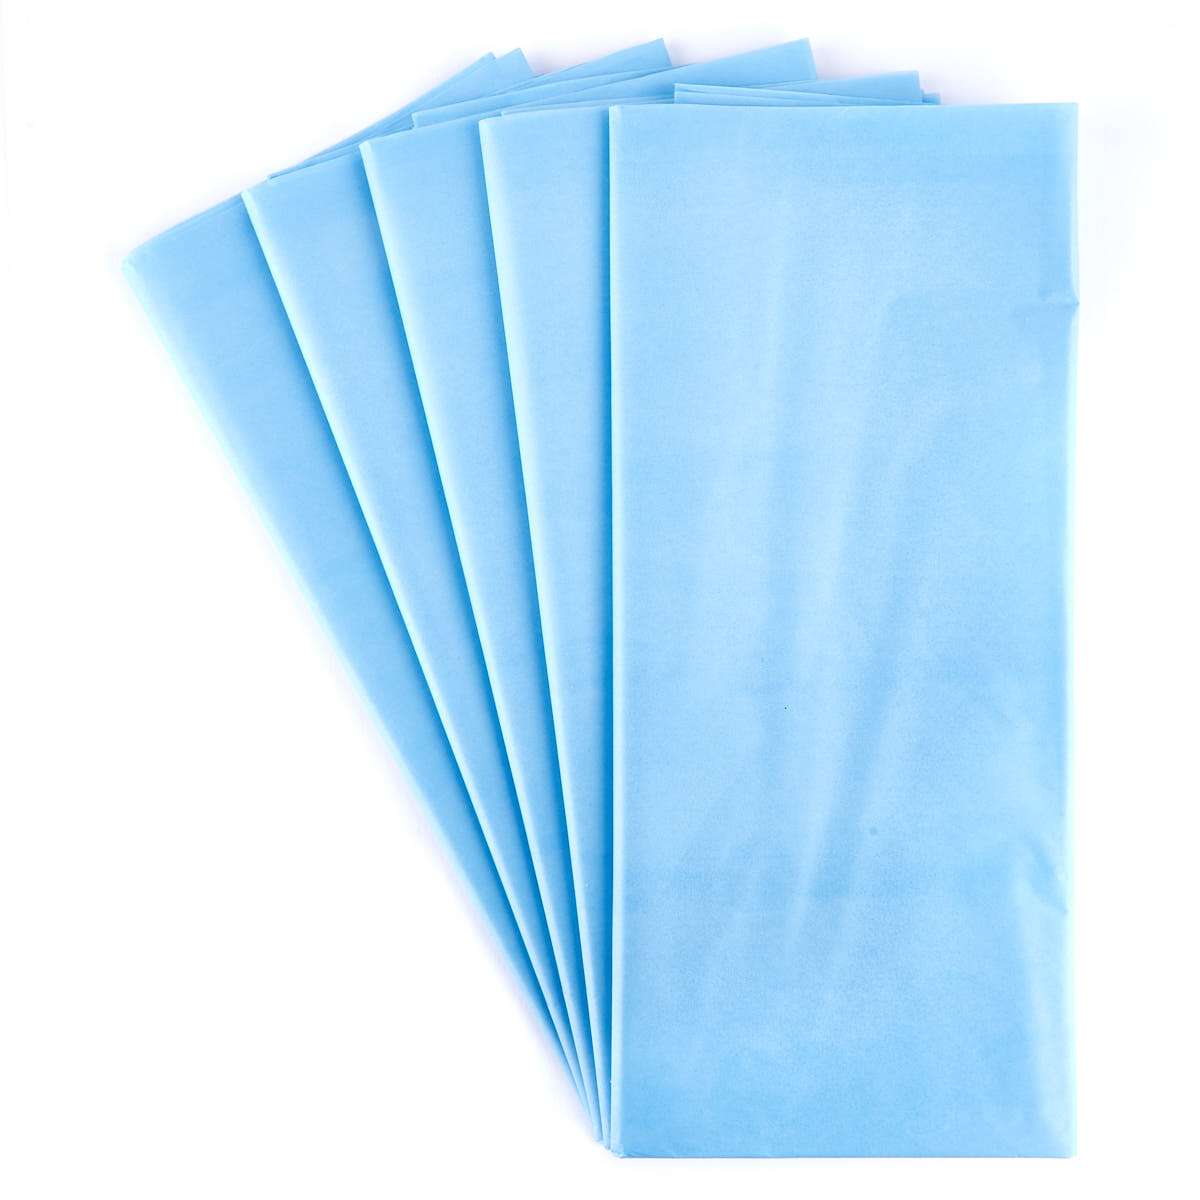 Tissue Paper Ream 750mm x 500mm, 480 Sheets - Turquoise Blue